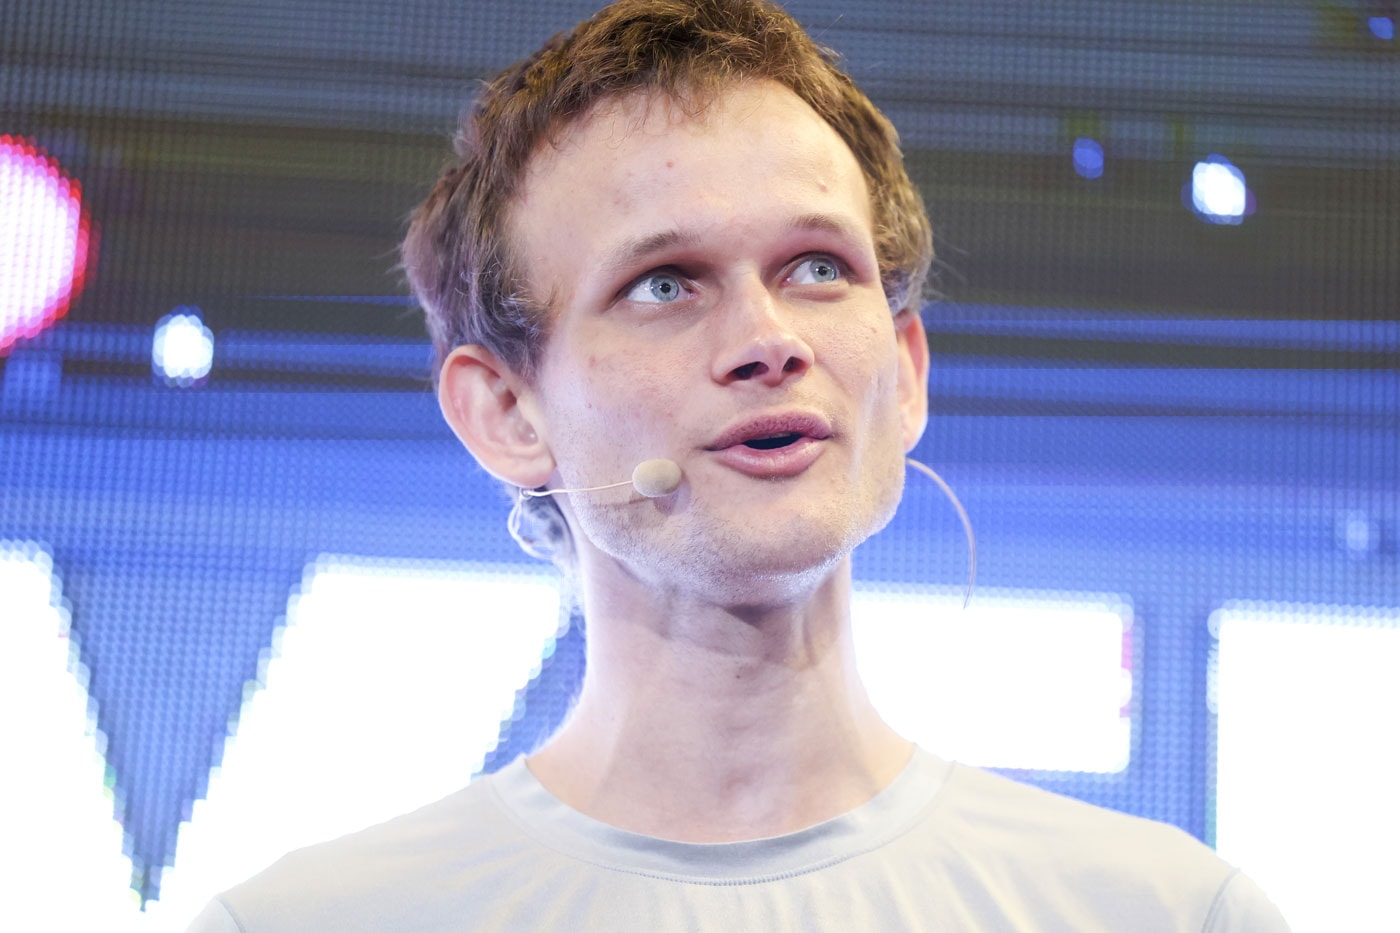 Ethereum Co-founder Vitalik Buterin Warns of Cryptocurrency's Dystopian Potential time magazine russian canadian crypto nft non fungible tokens millionaire